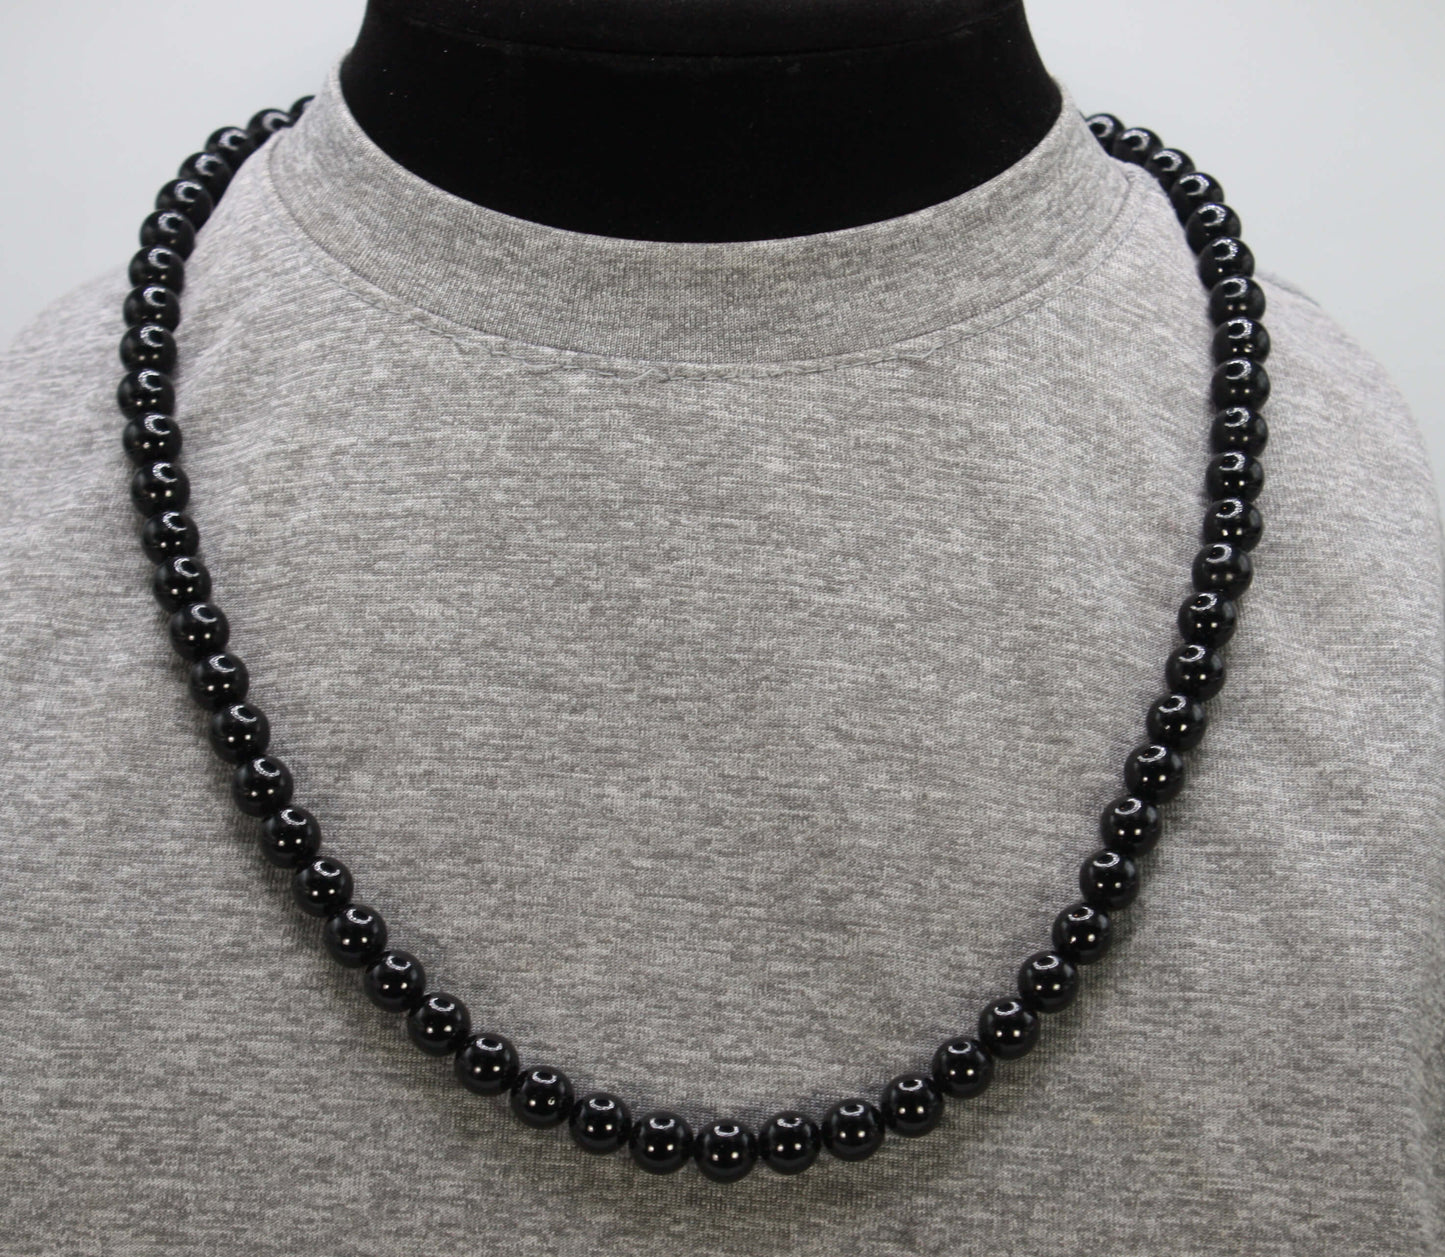 Majestic Black Coral Necklace with Magnetic Clasp - 8mm: Embrace the Depths of Elegance